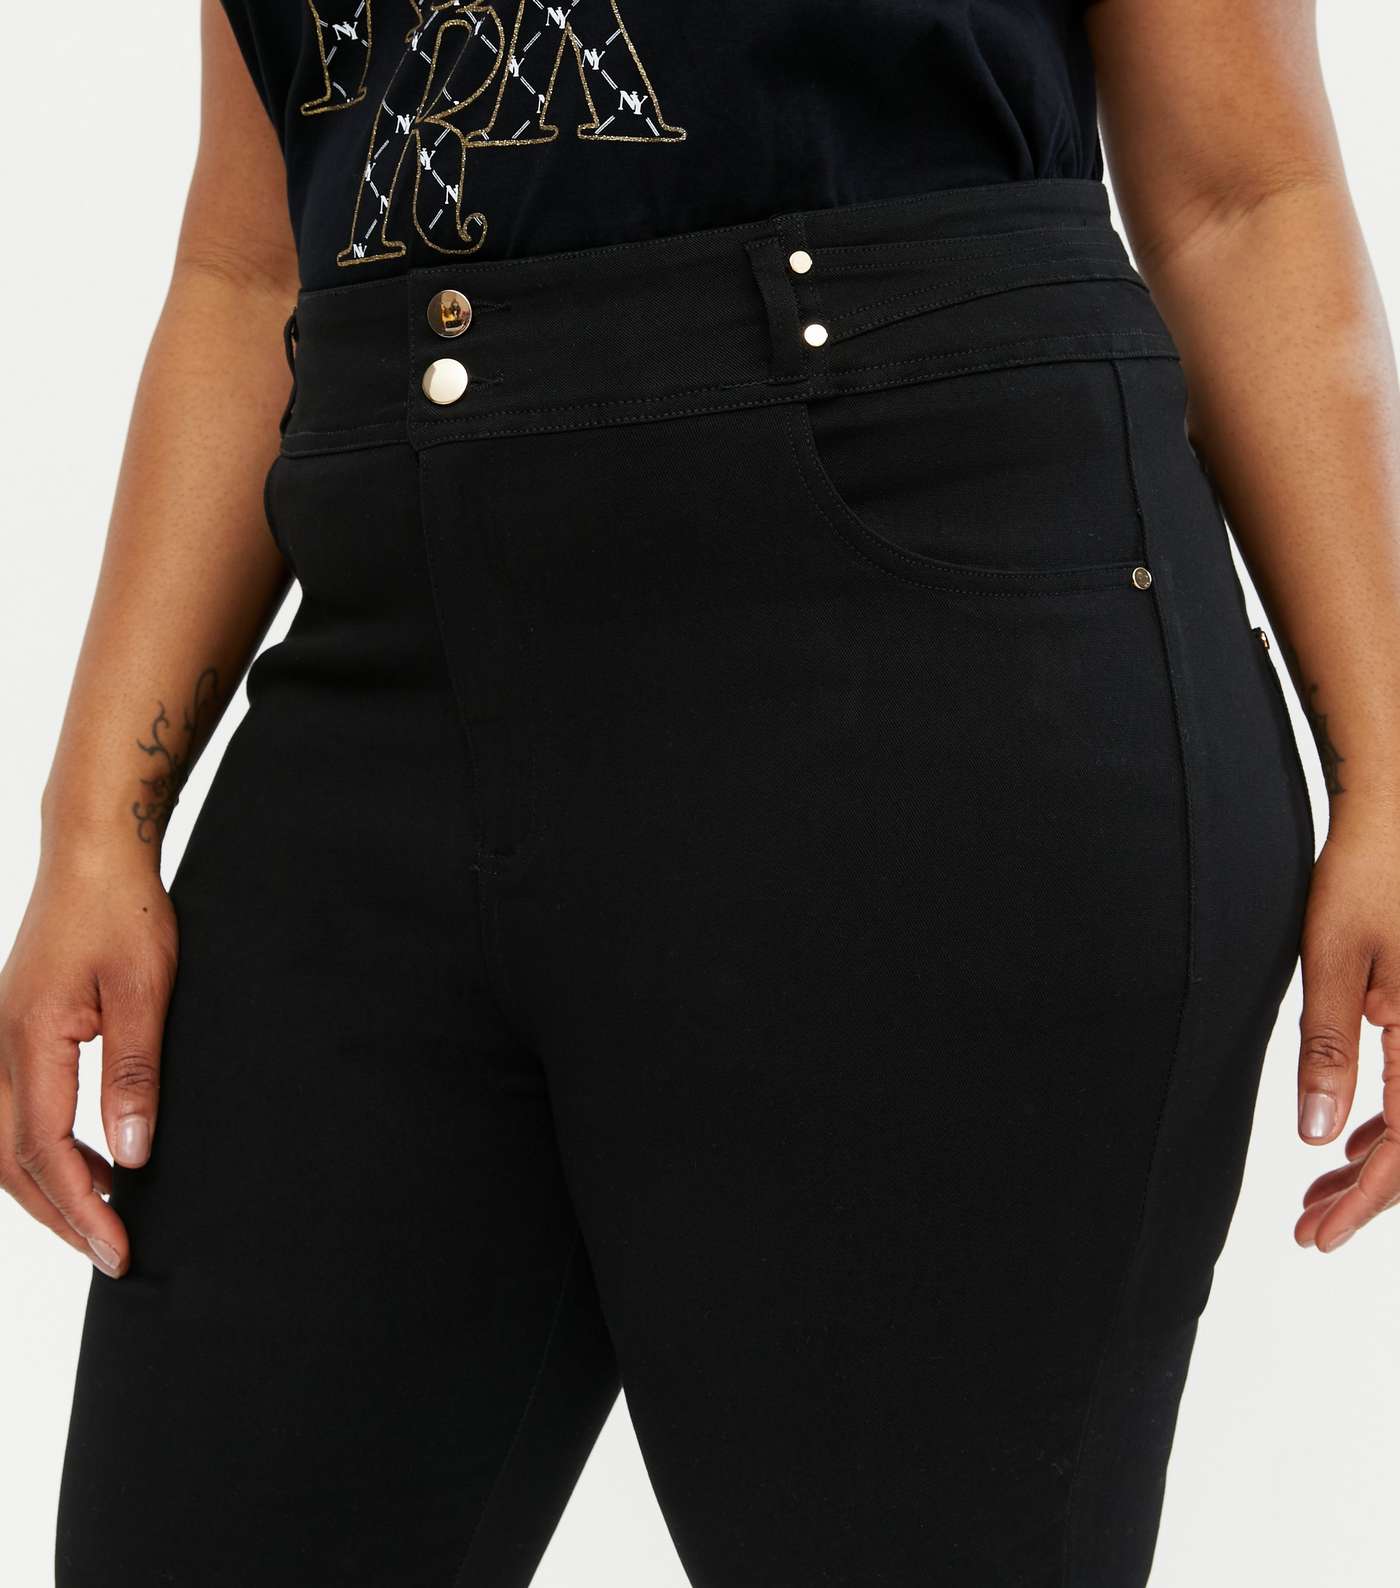 Blue Vanilla Curves Black Double Button Skinny Jeans Image 3